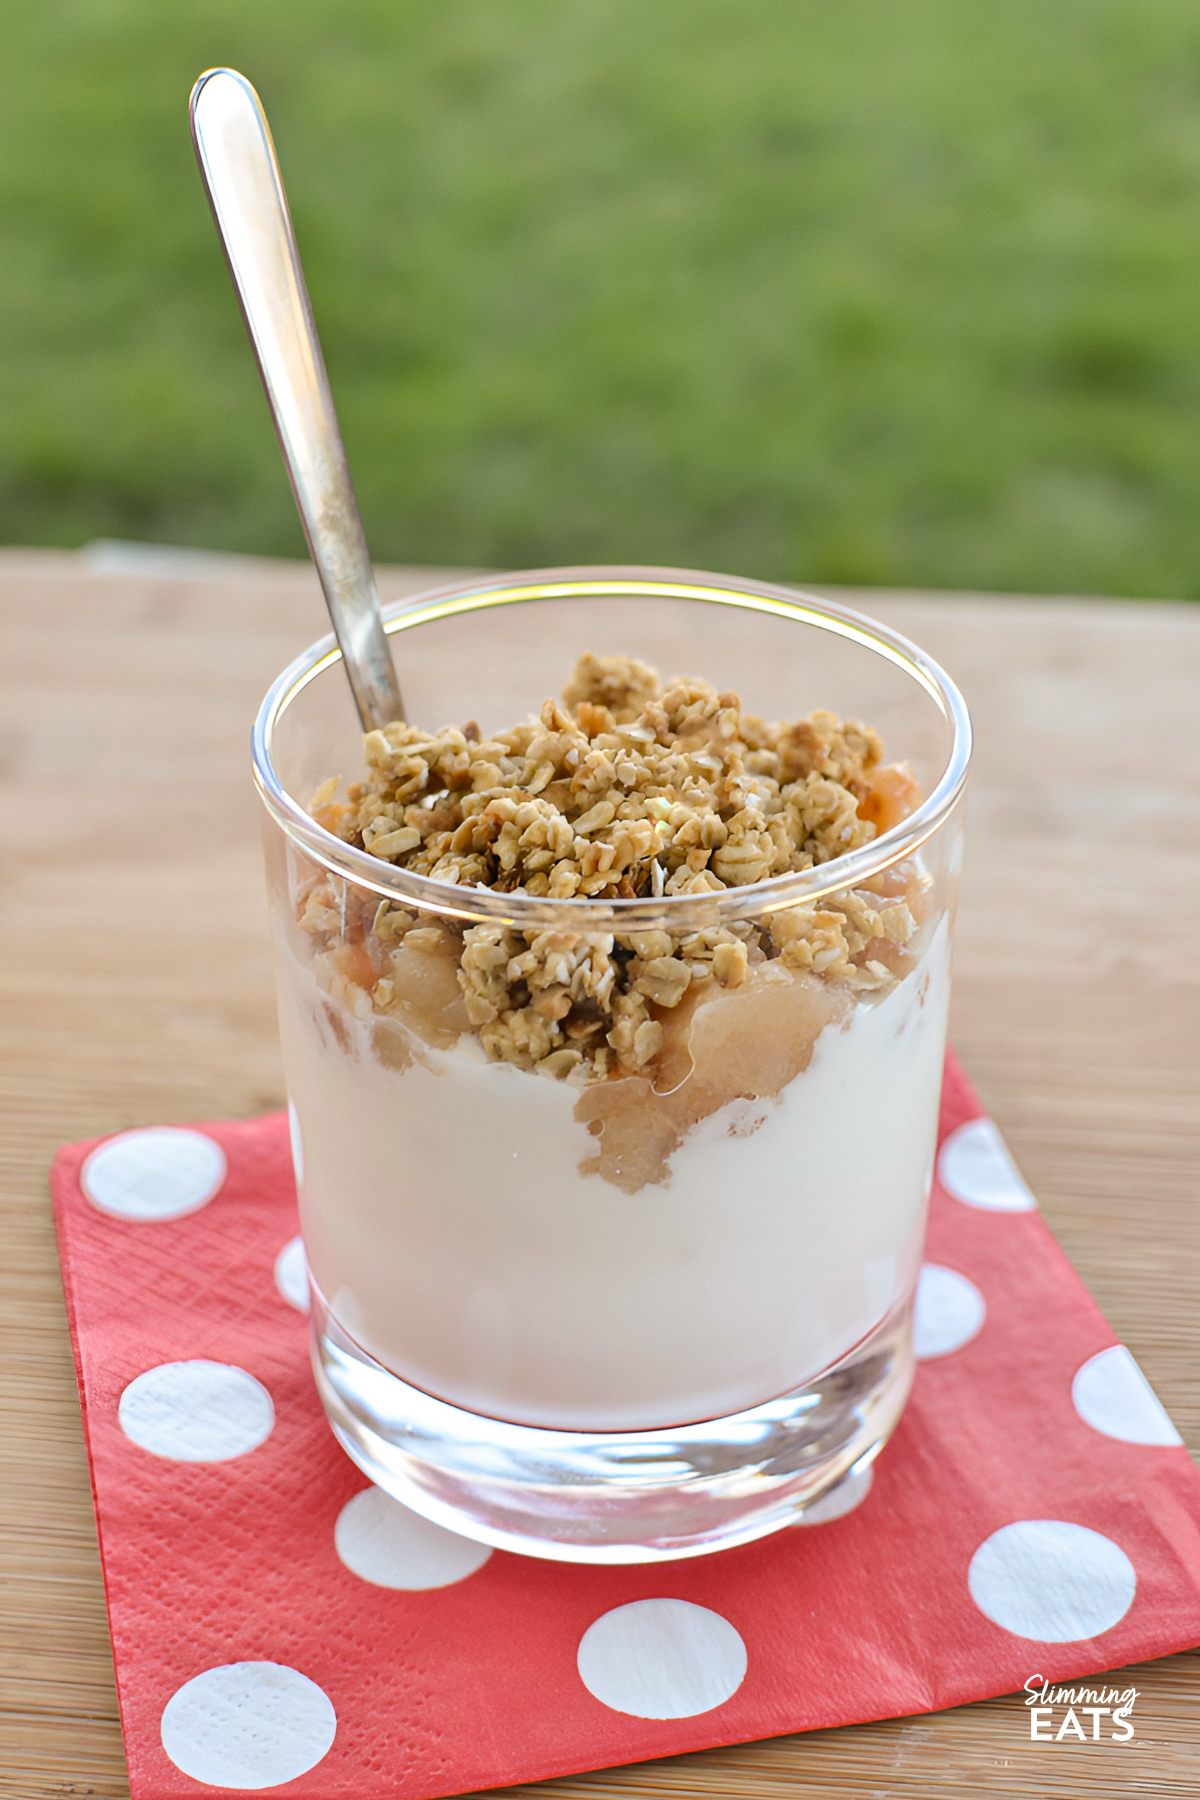 A Small glass filled with layers of pear crumble and yogurt parfaits, accompanied by a spoon, resting on a pale red napkin adorned with white polka dots